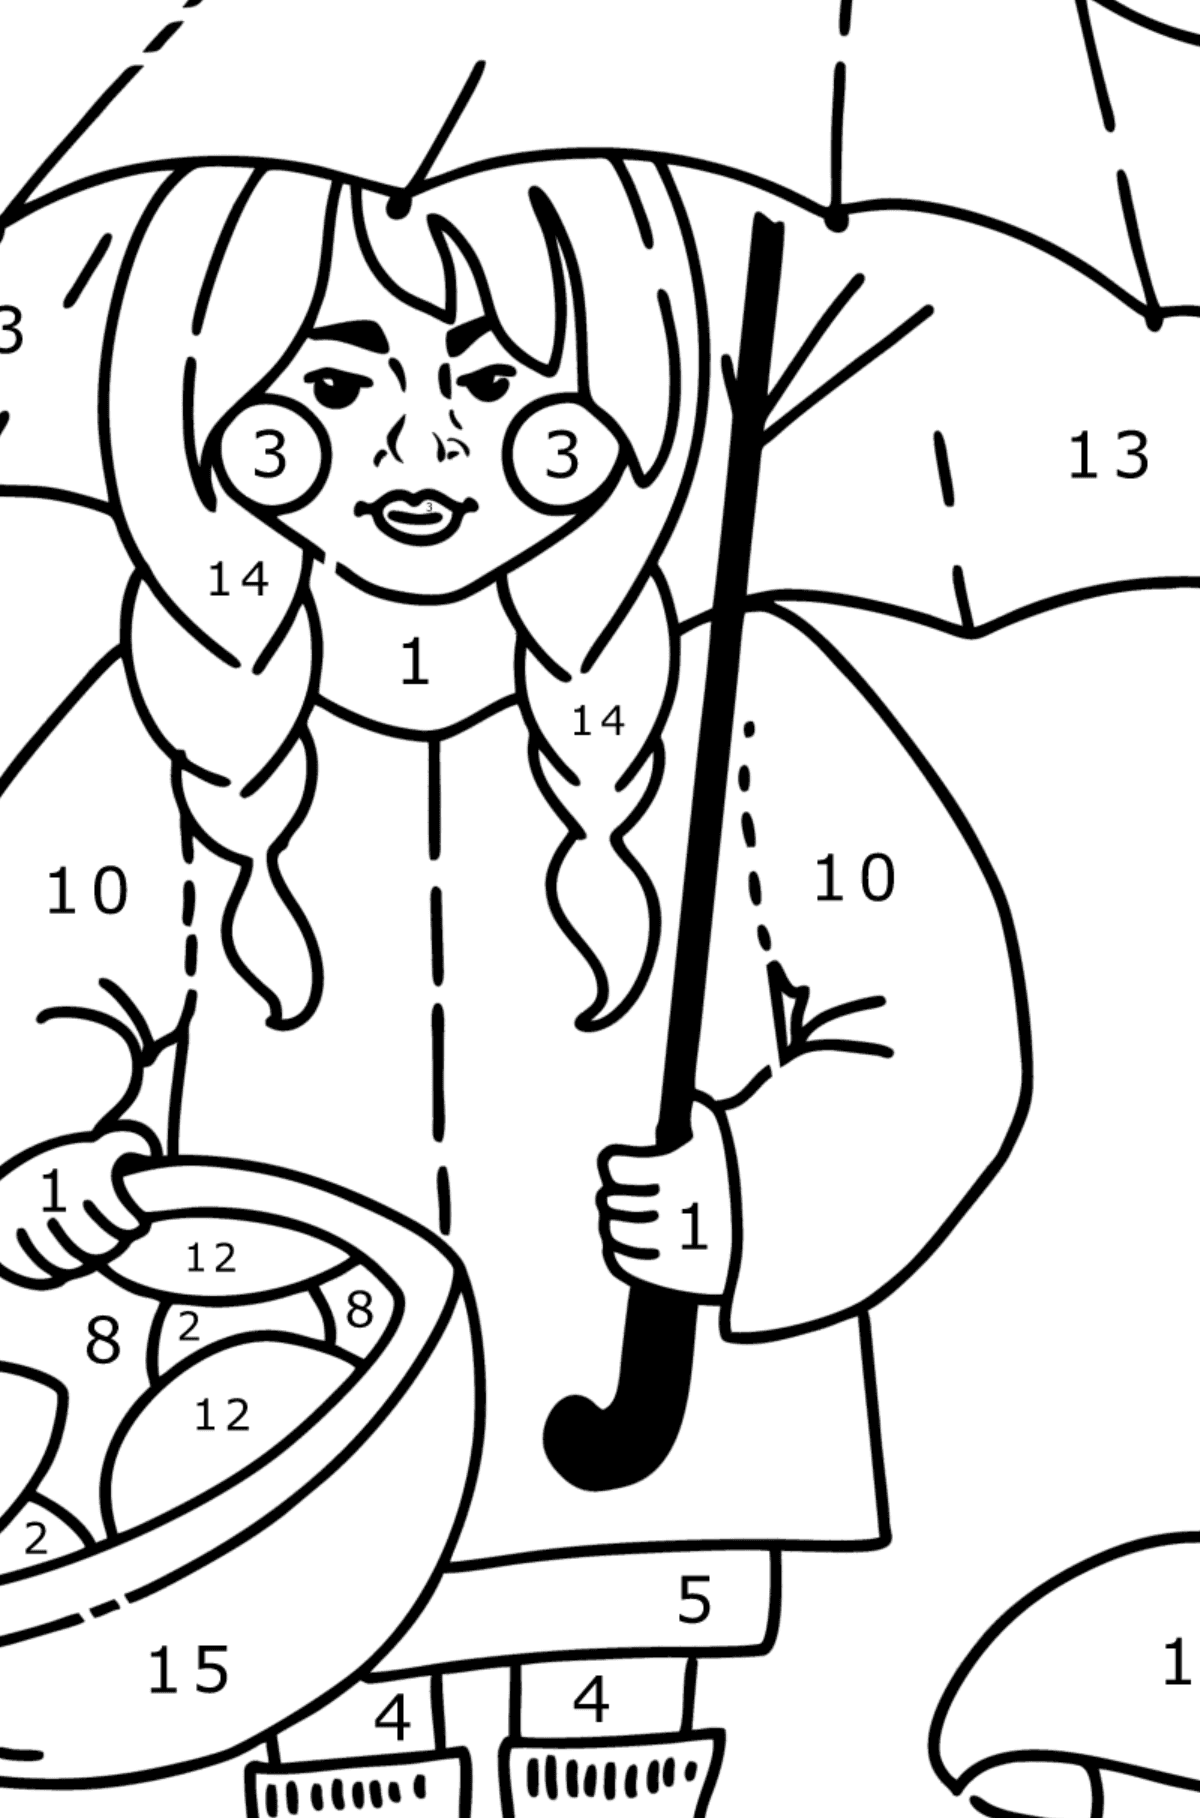 Coloring page - Girl picking mushrooms - Coloring by Numbers for Kids